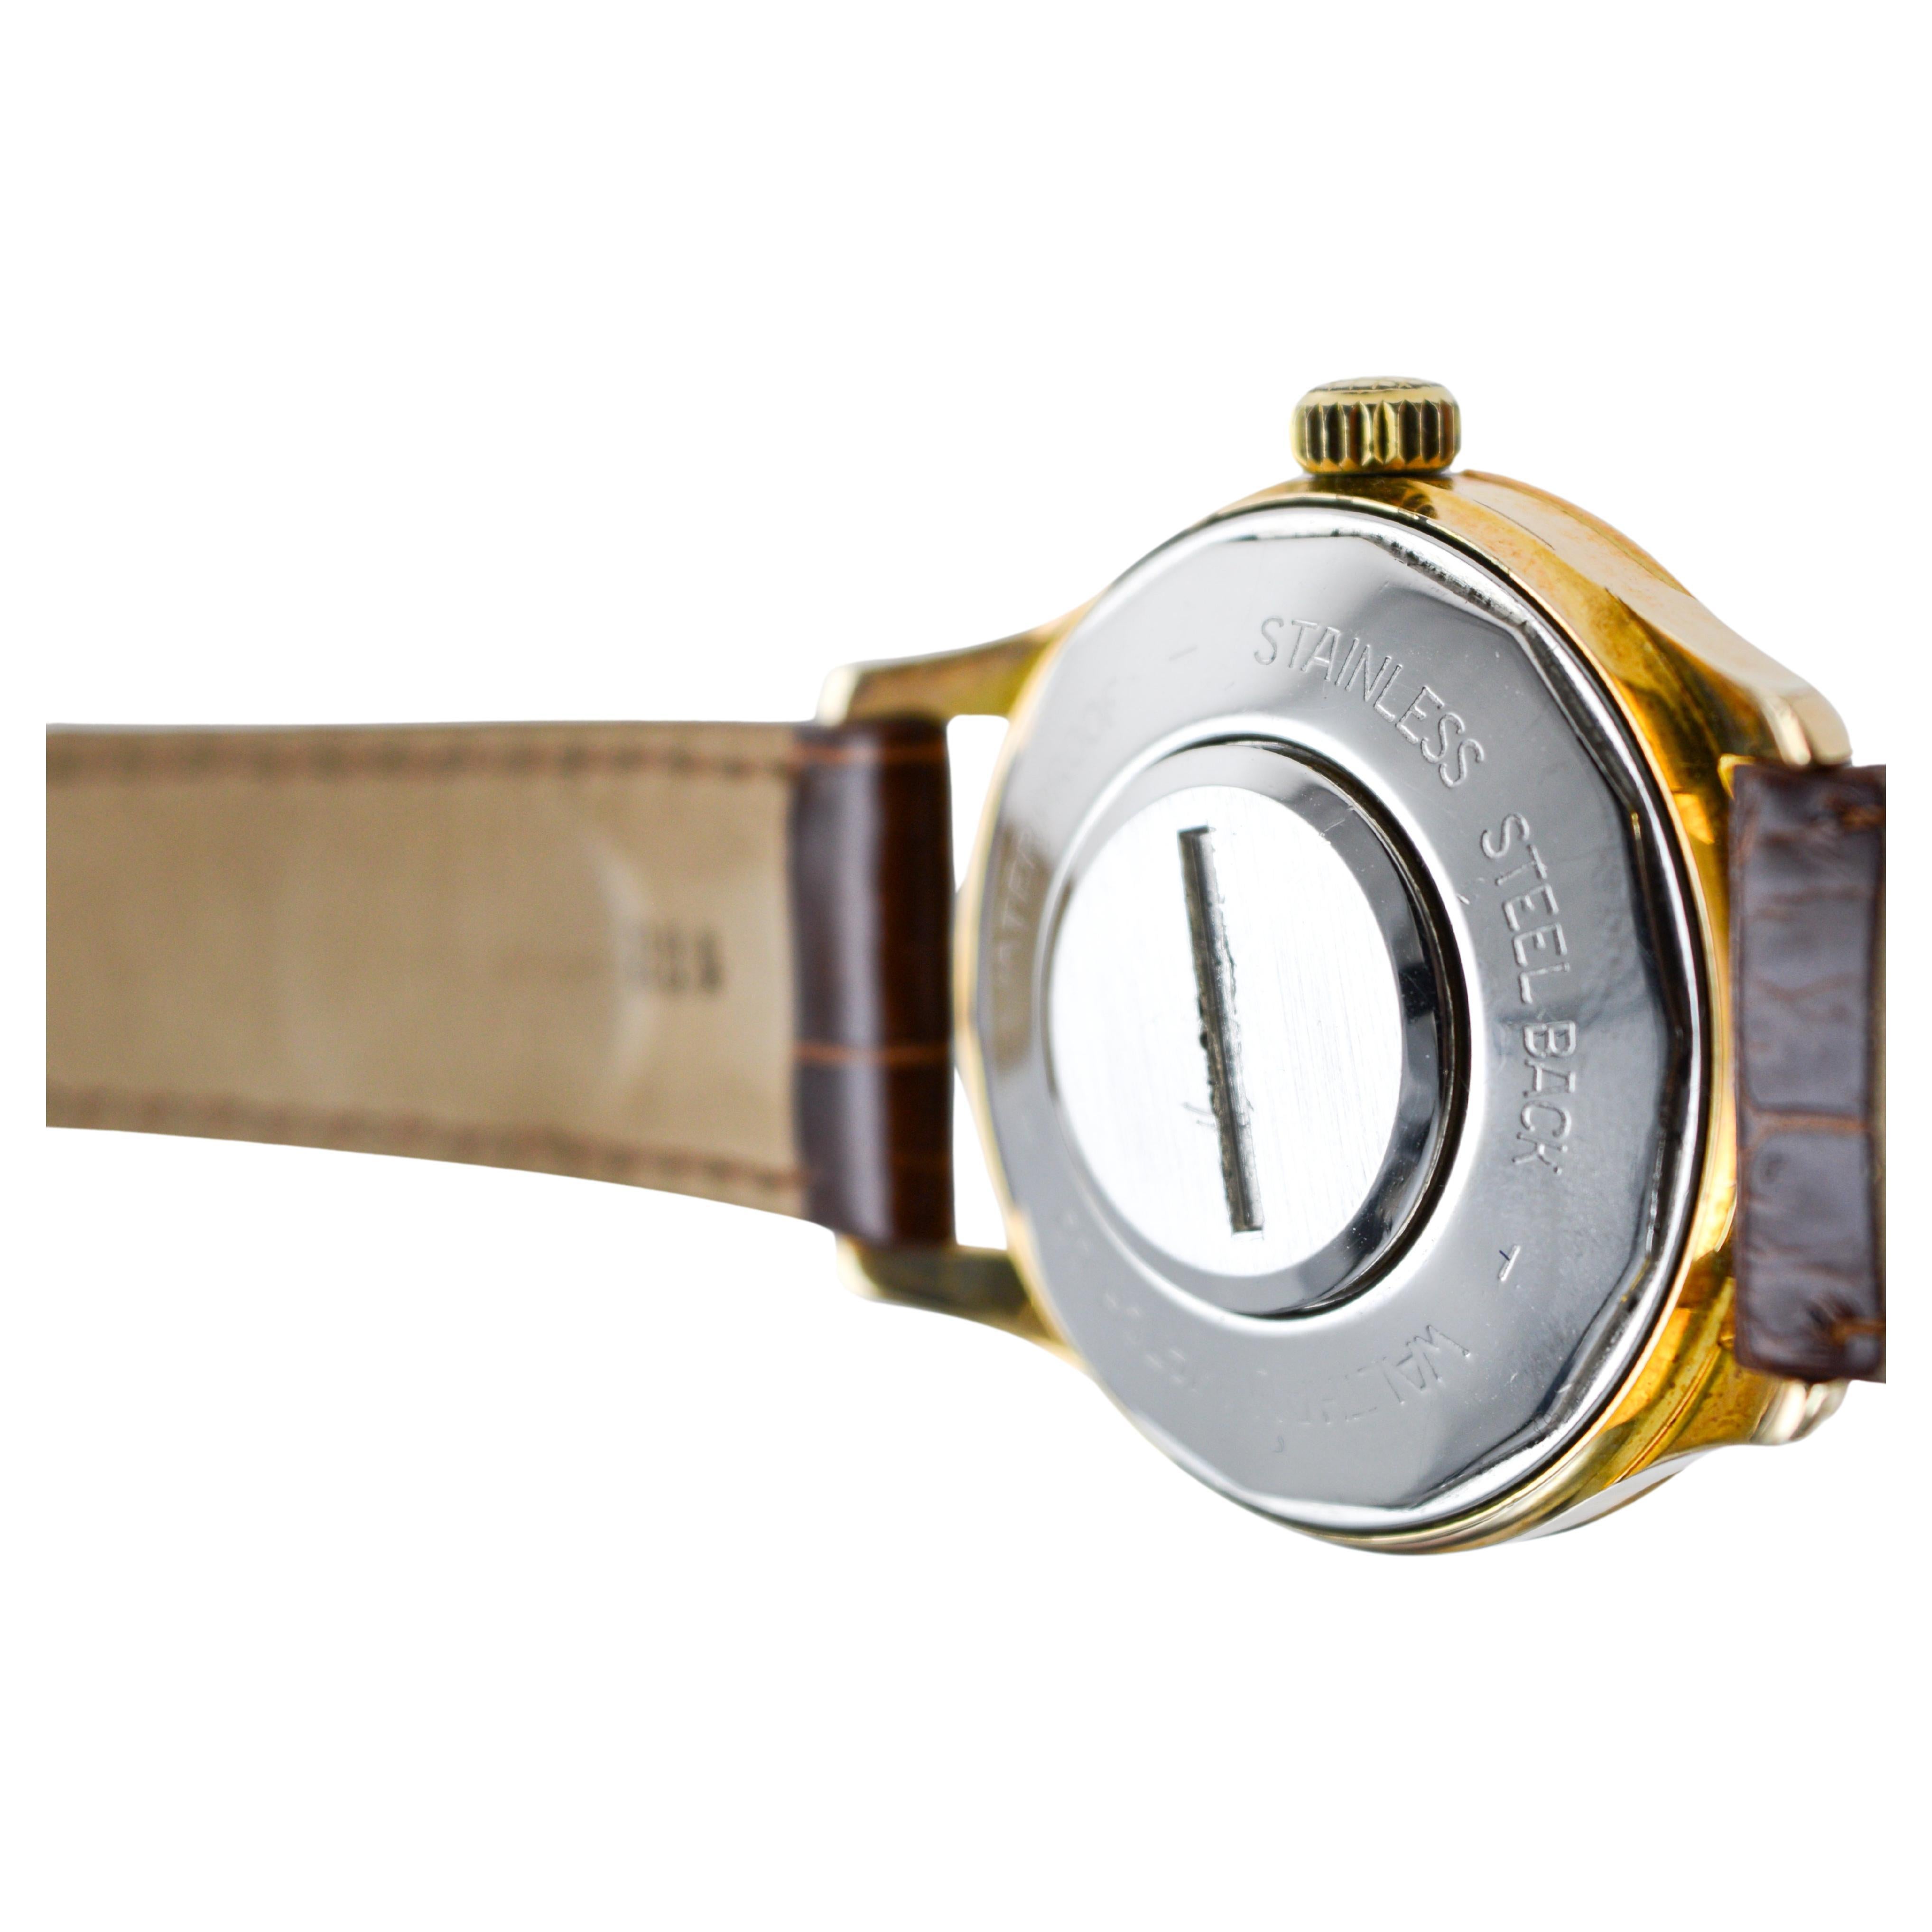 Waltham Yellow Gold Filled Mid Century Experimental Electromechanical Watch For Sale 5